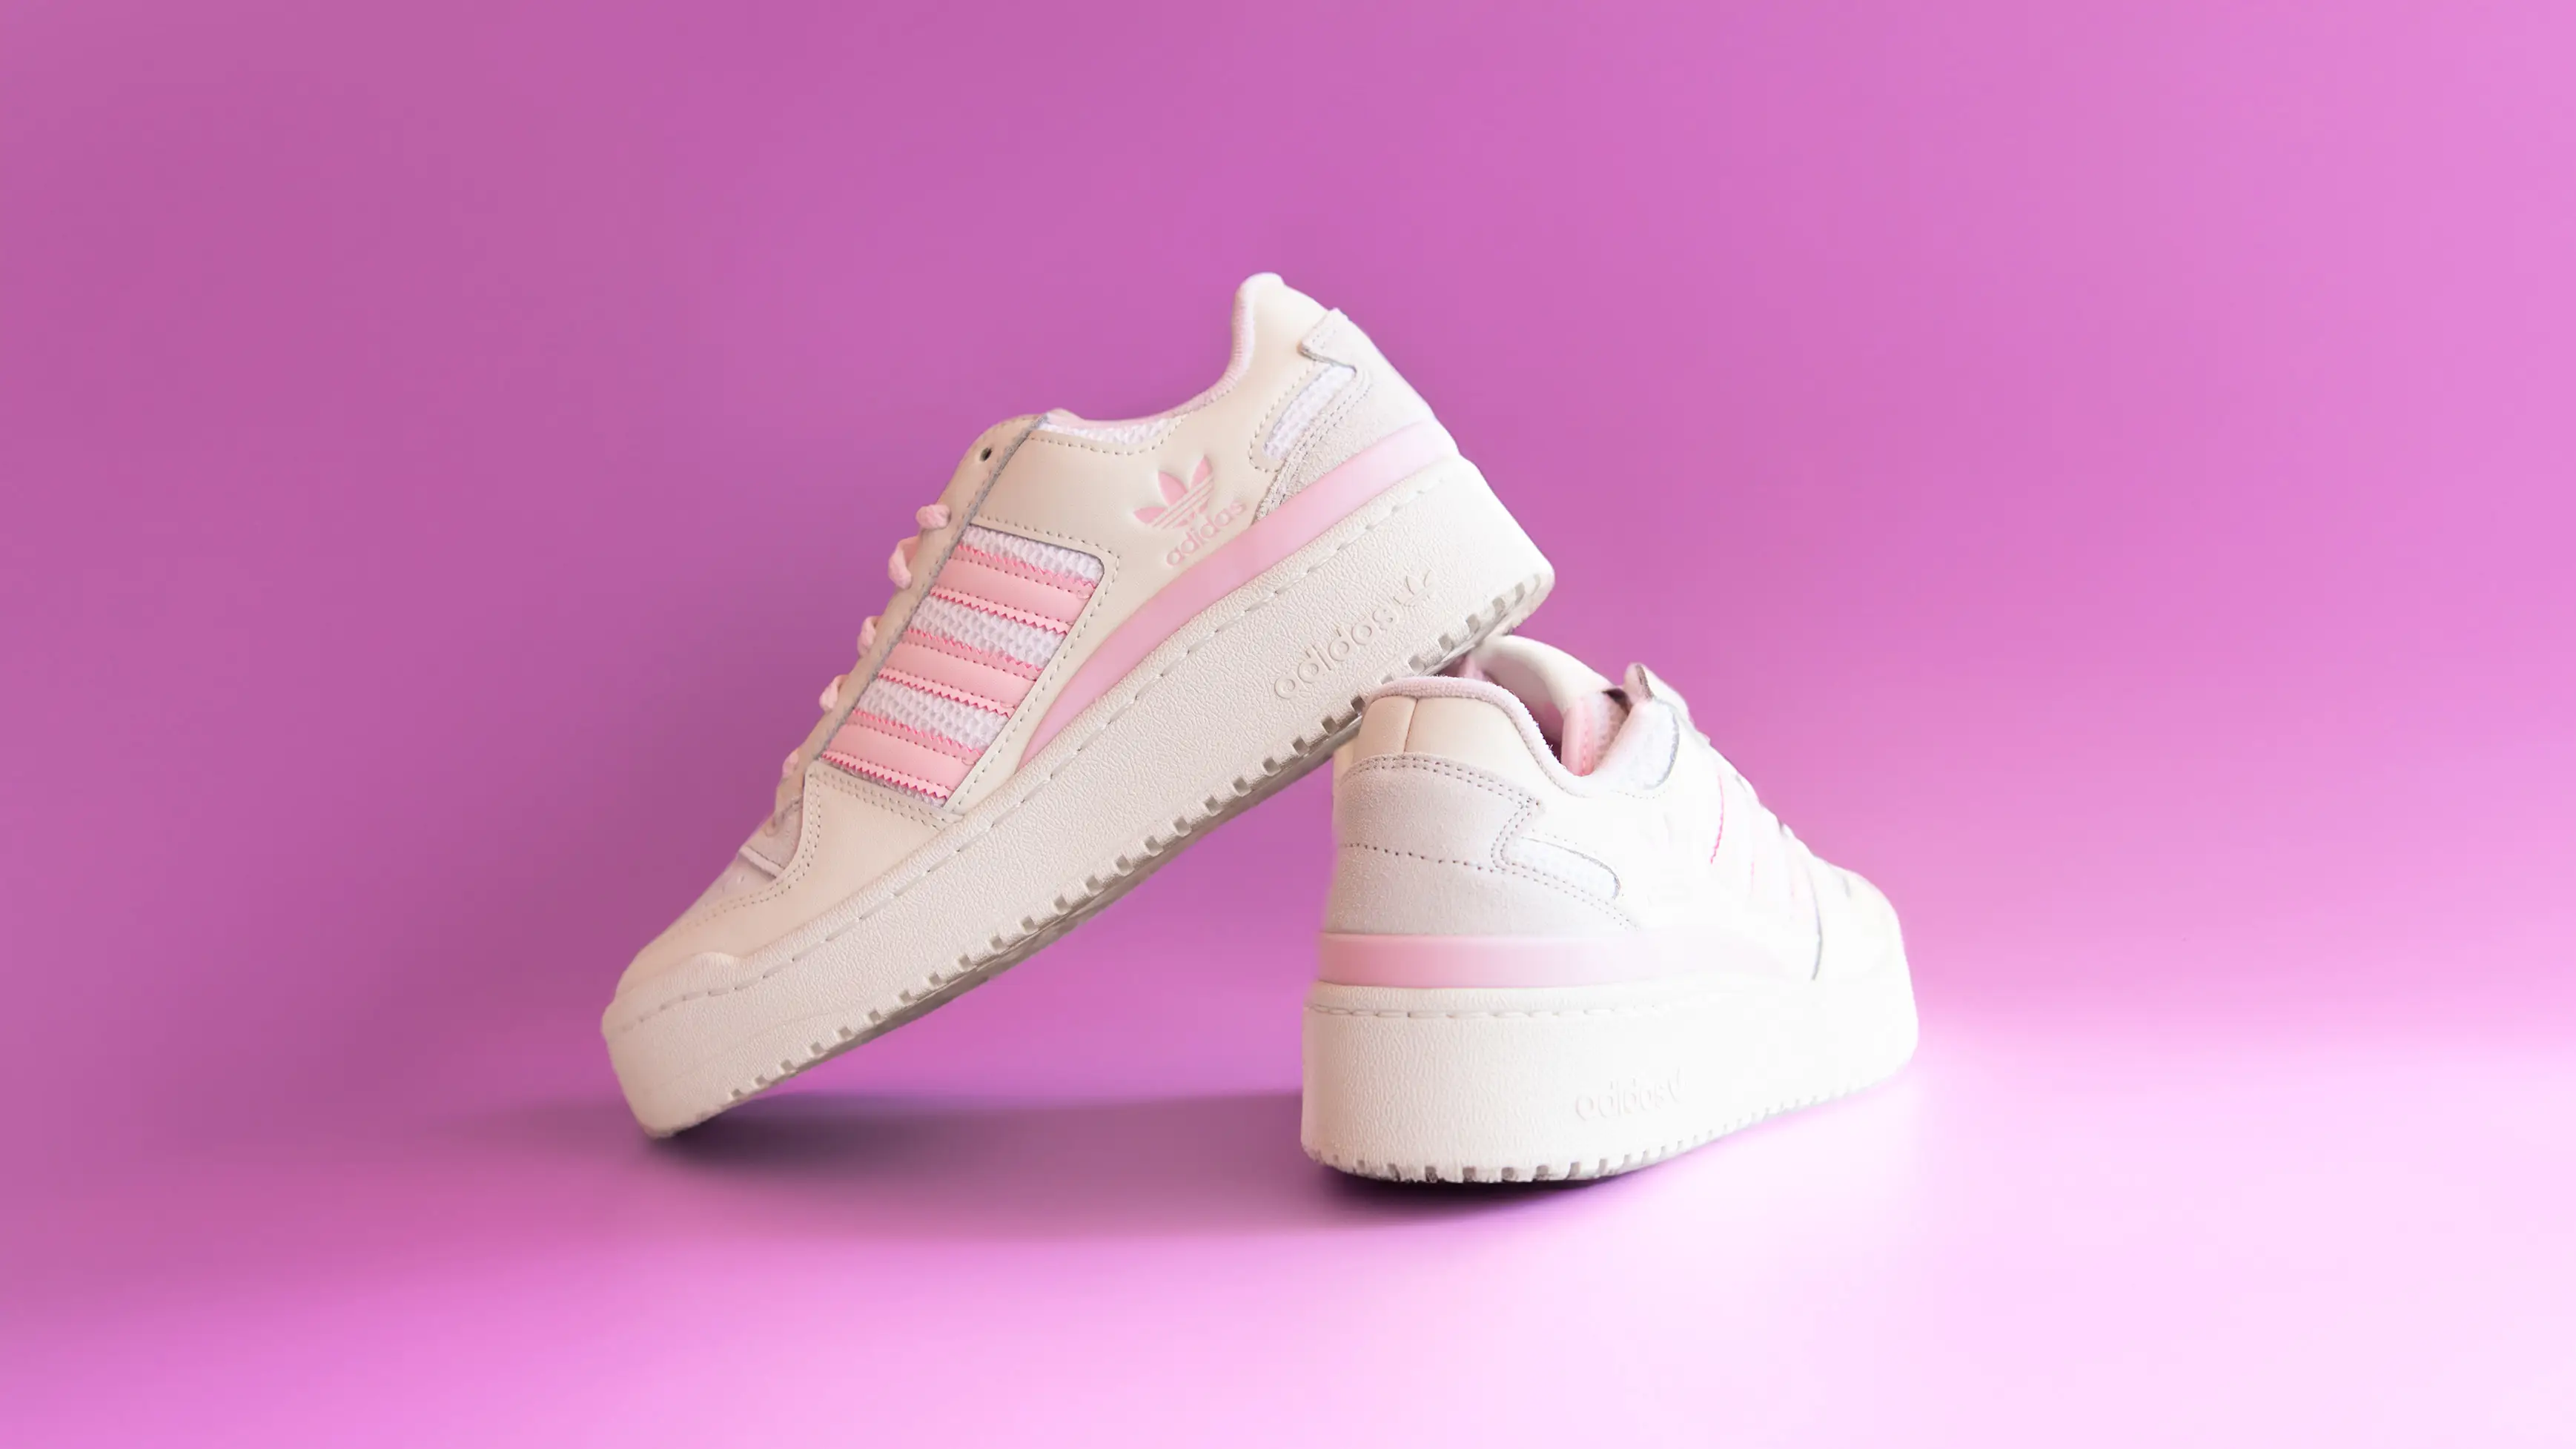 adidas Veste Terrex Lite Down Continues With This Cream & Pink adidas Forum Bold